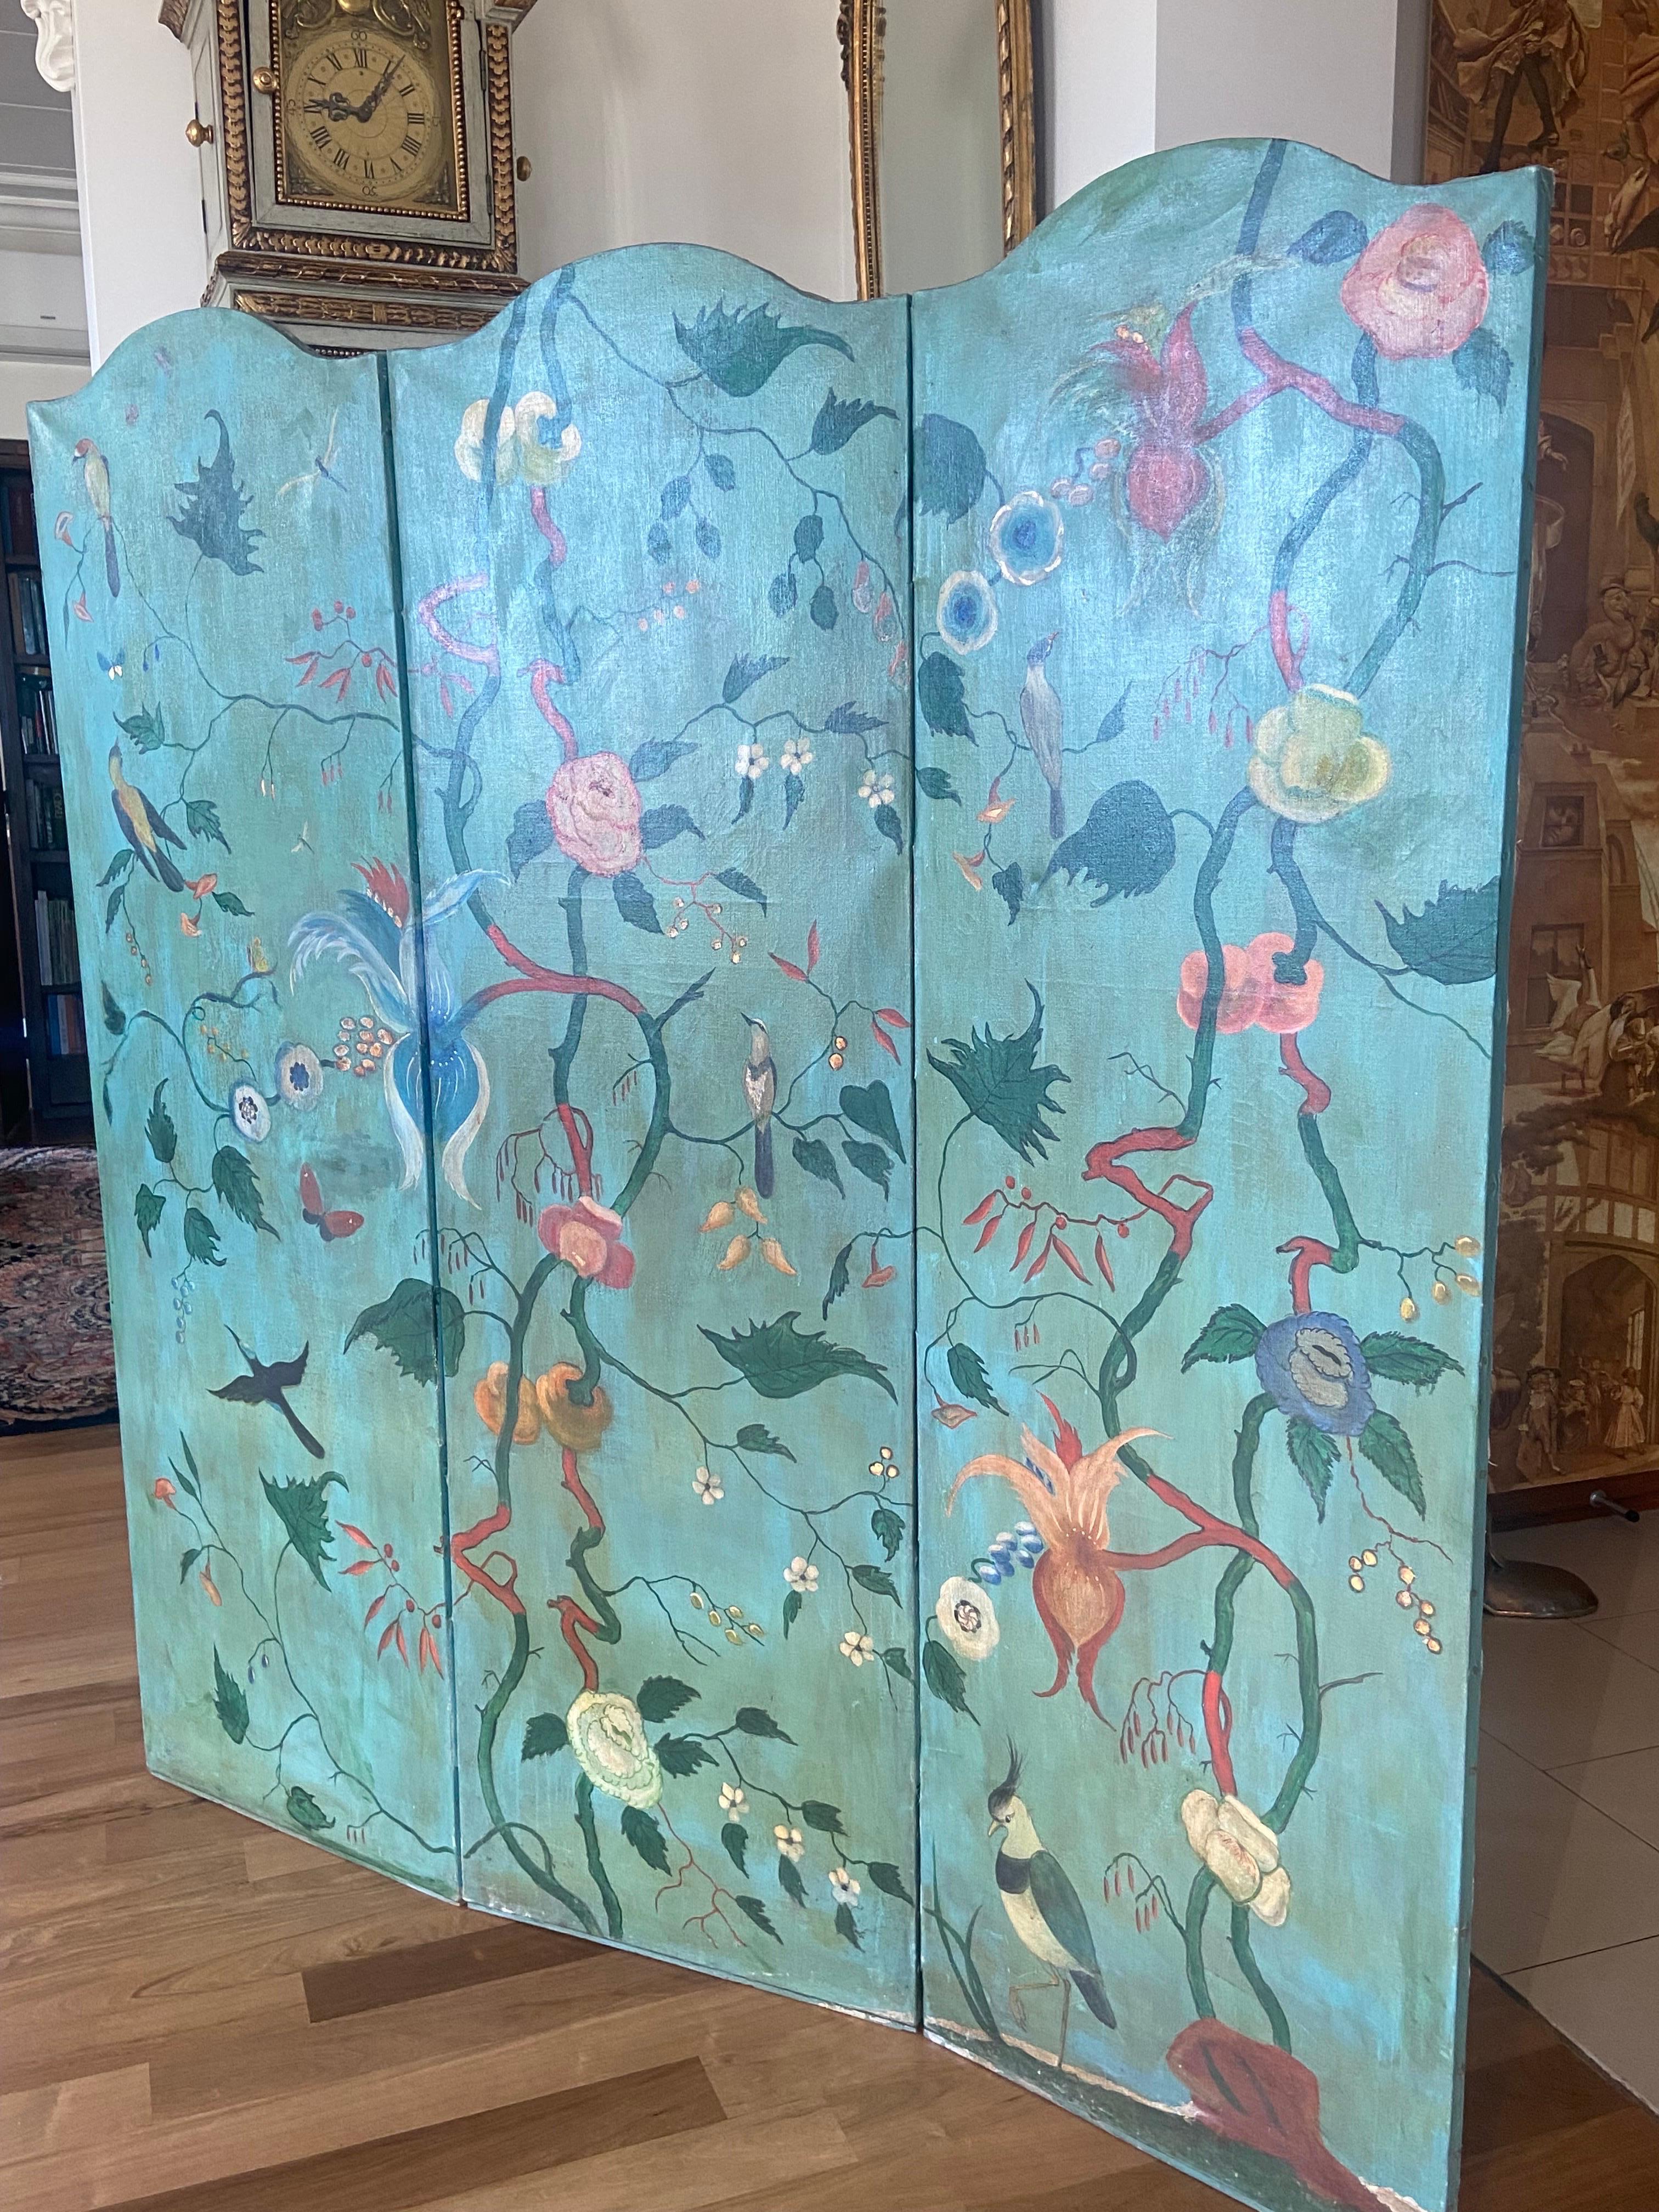 Lovely large French room divider or screen with three leaves in canvas hand painted in vivid colors with birds and foliage scrolls on blue base, after a pattern from a wall canvas preserved in the Château de Talcy in France. The piece was made in